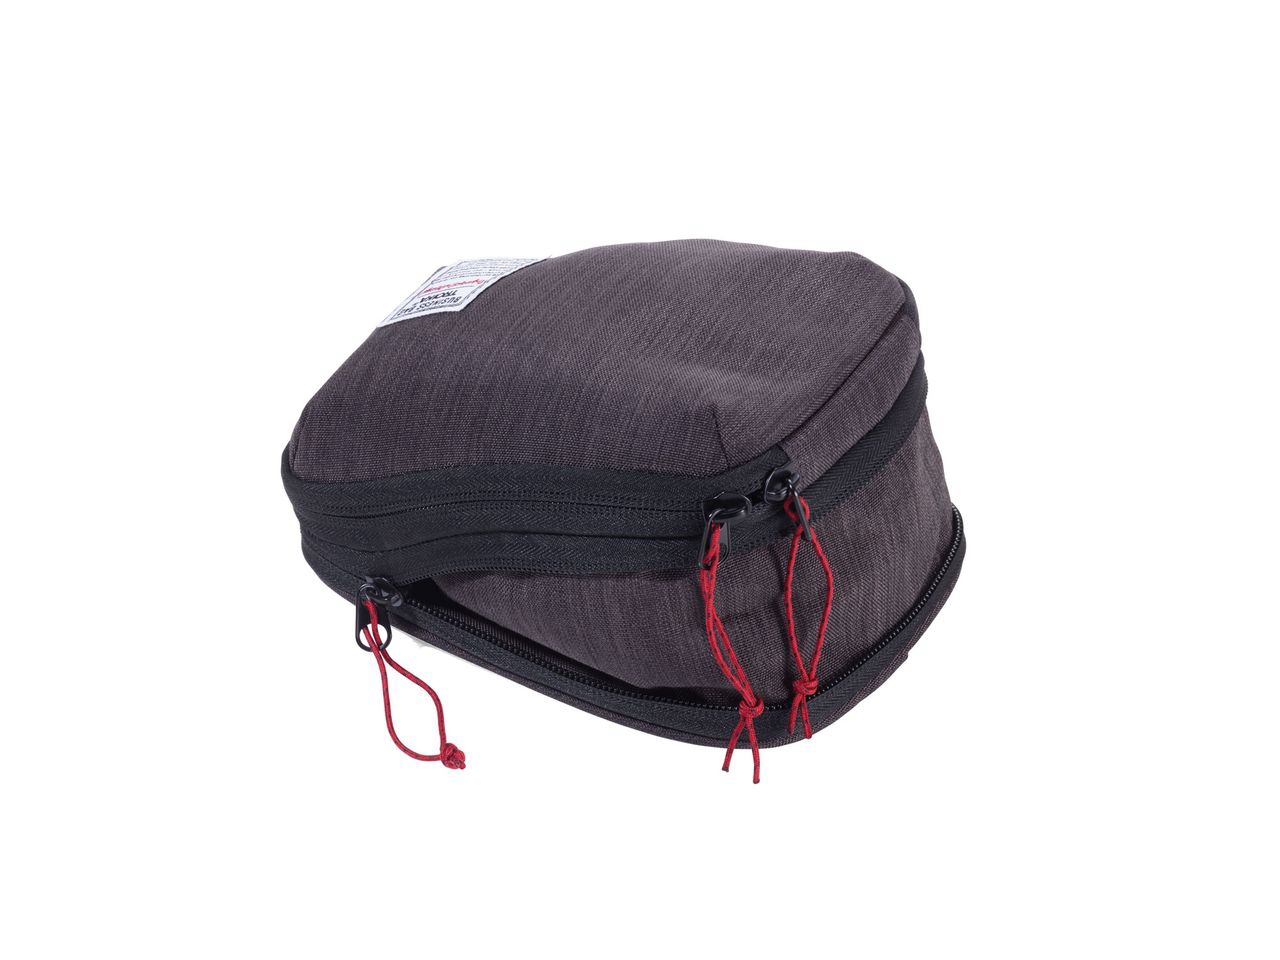 Cuscino cervicale Business Travel Pillow